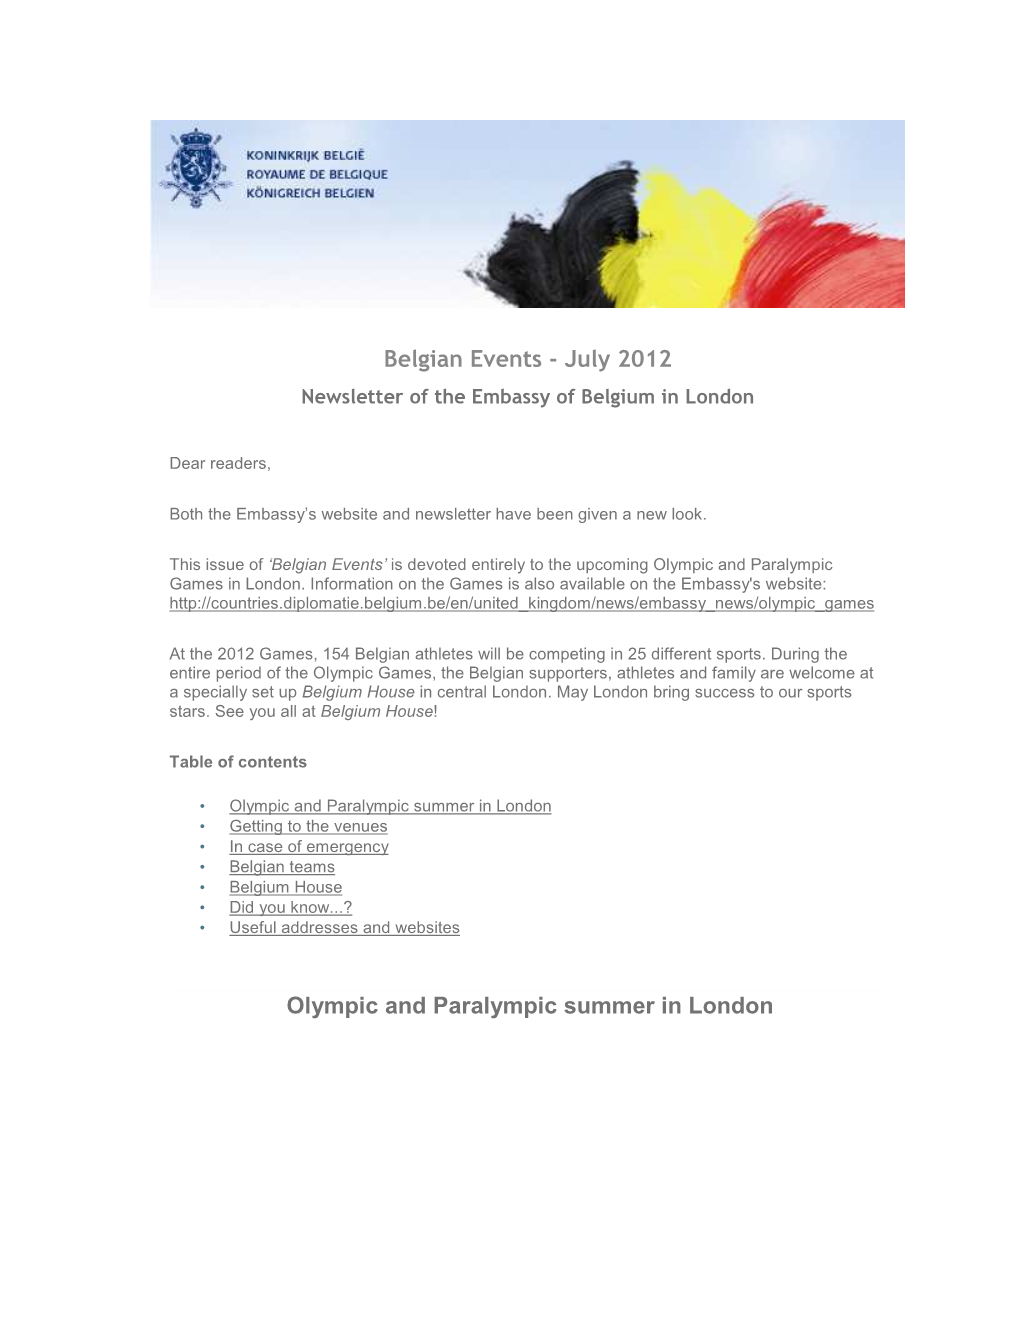 Belgian Events - July 2012 Newsletter of the Embassy of Belgium in London